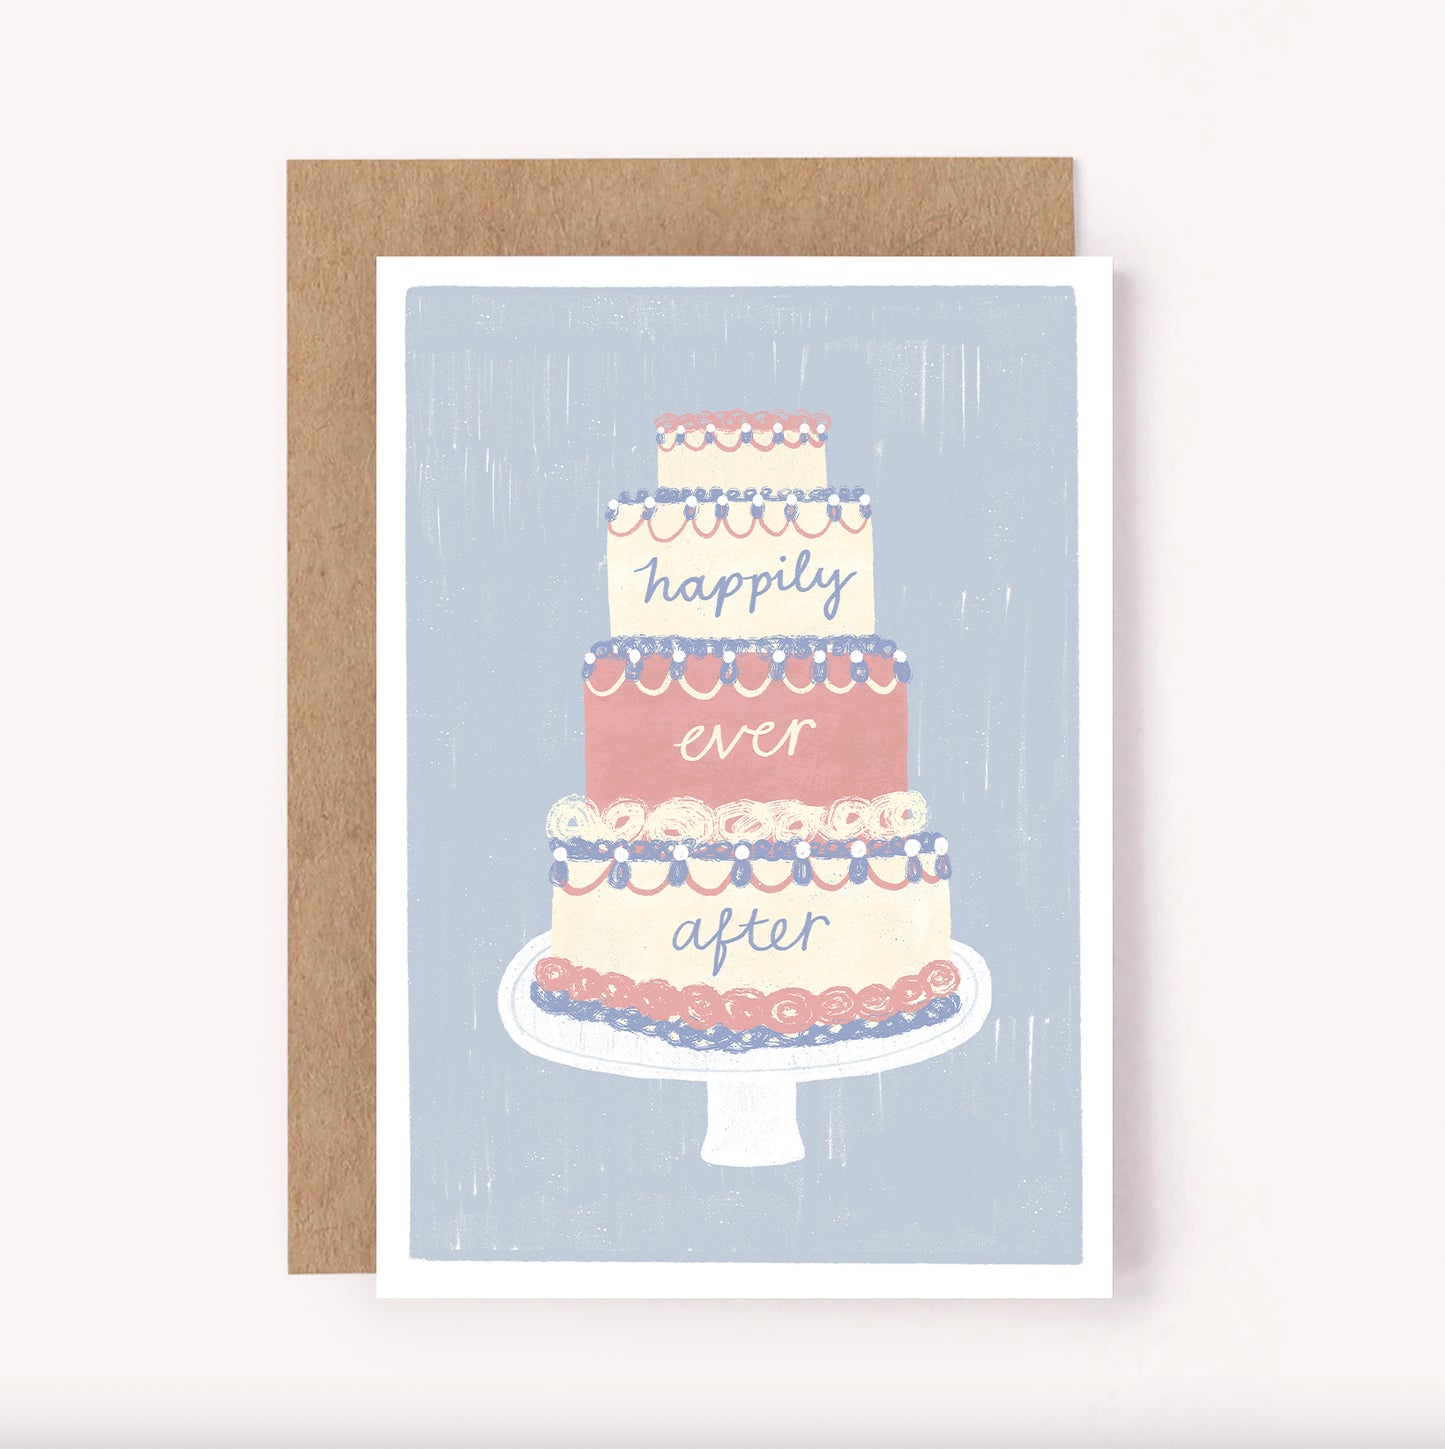 Illustrated tiered wedding cake set upon a blue background reads "Happily Ever After". A cute but classic wedding card for newlyweds